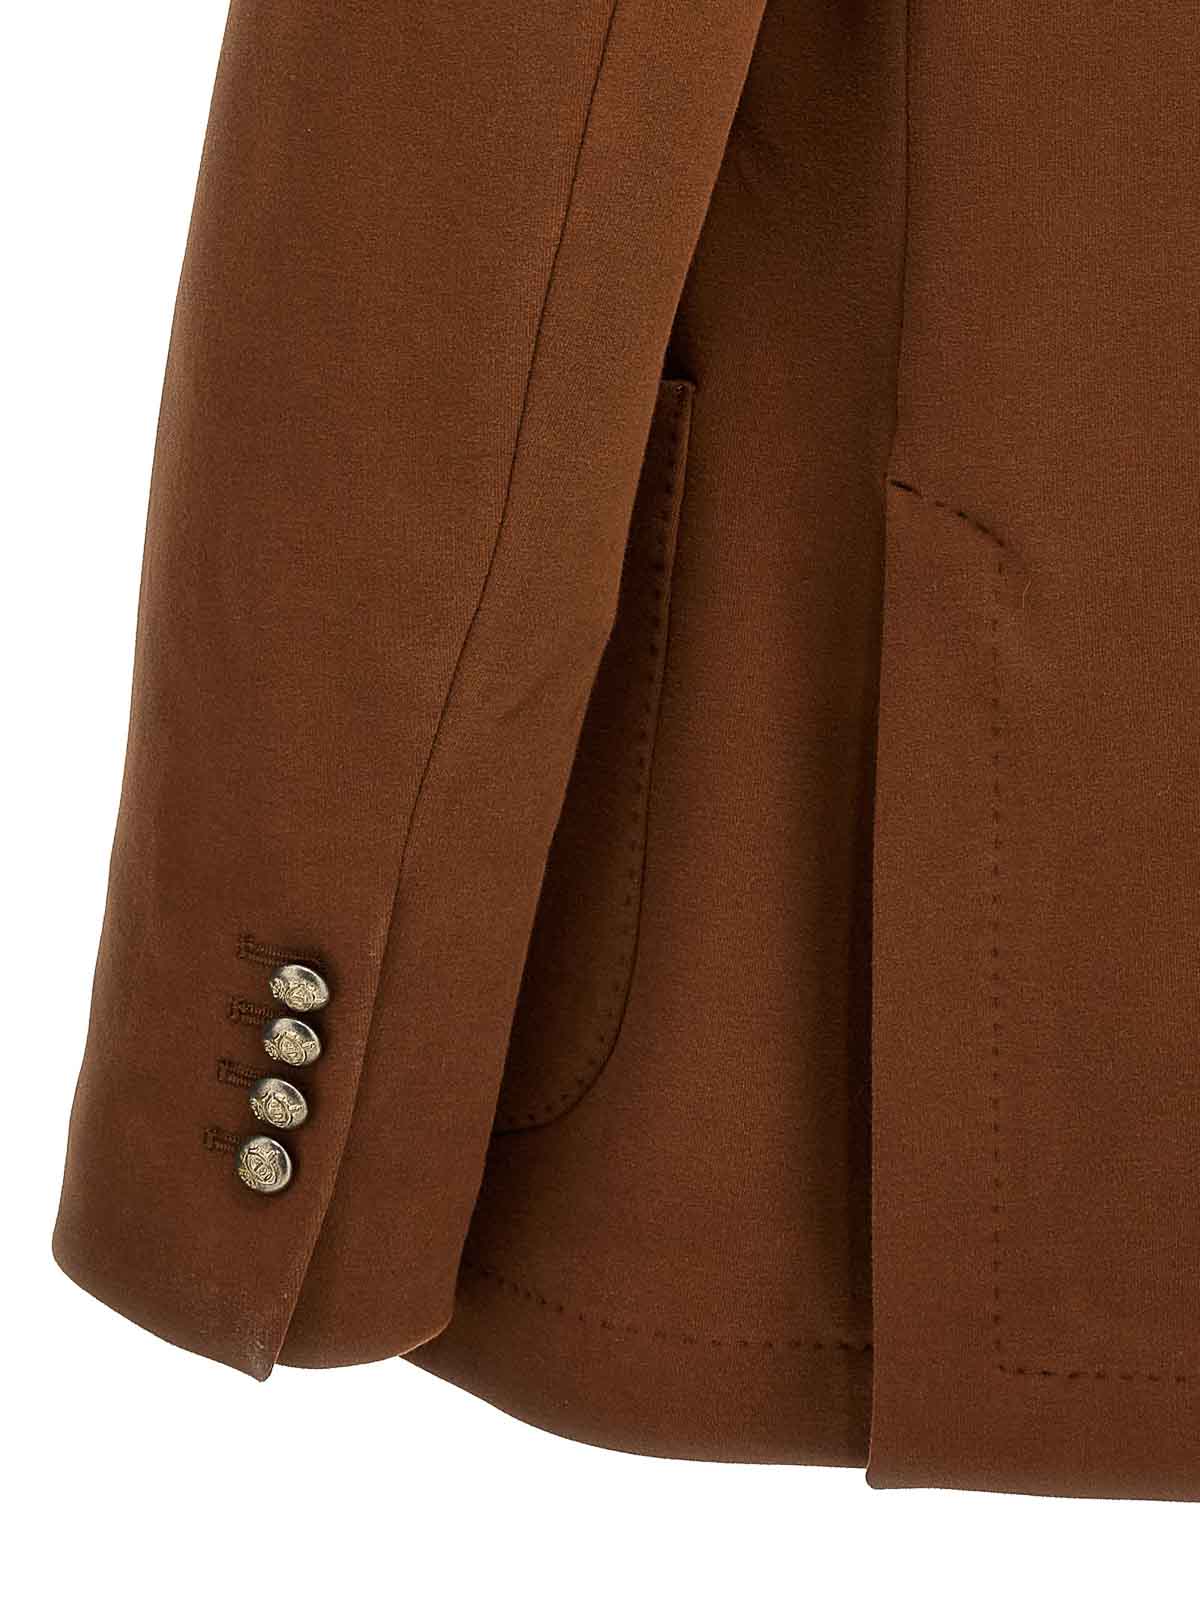 Shop Circolo 1901 Double-breasted Jersey Blazer In Brown